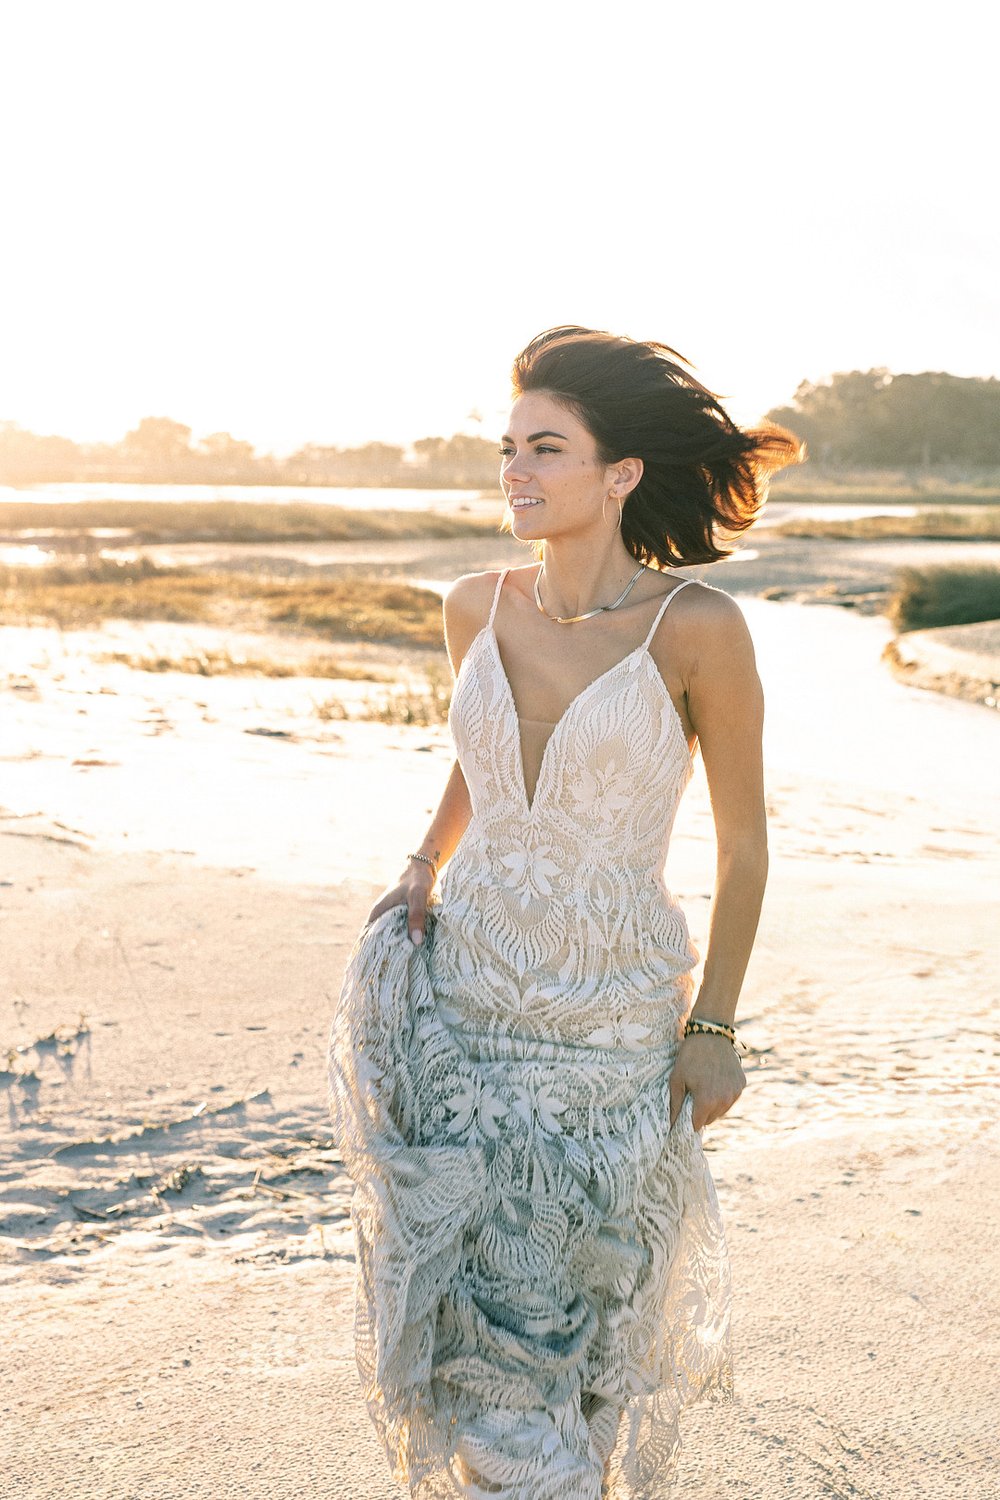 A beachy bridal moment_Carly Terry Photography_AW BRIDAL-0485_low.jpg